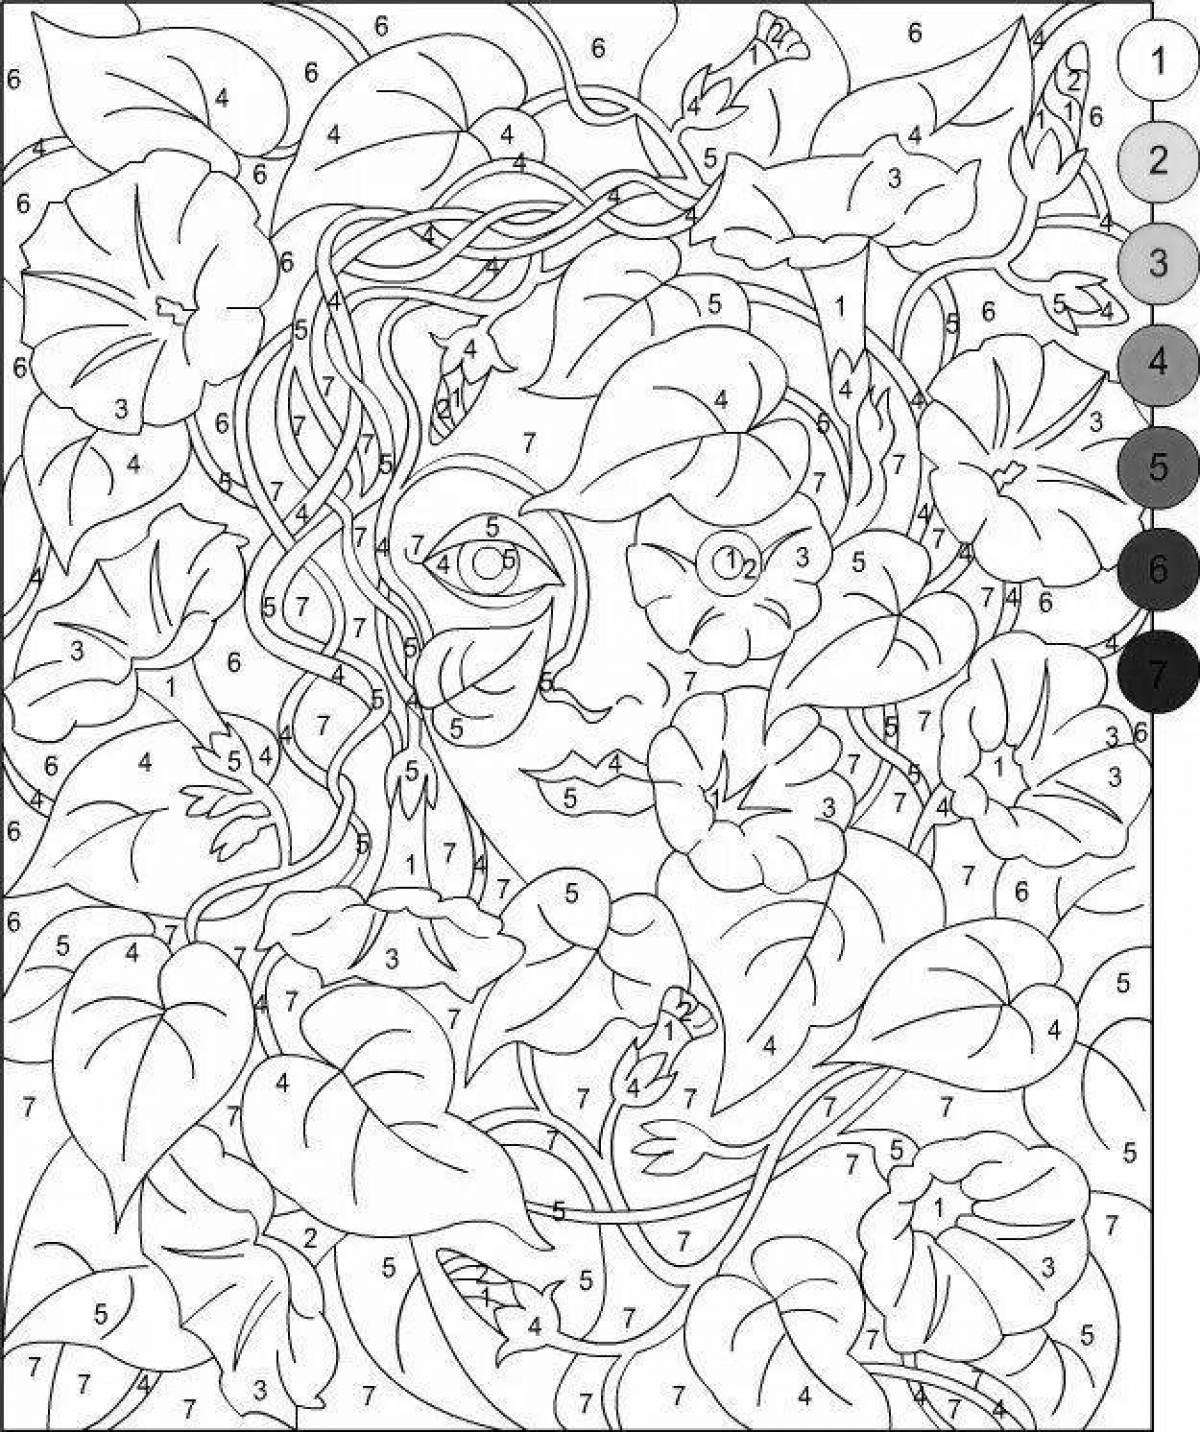 Fun coloring by phone numbers